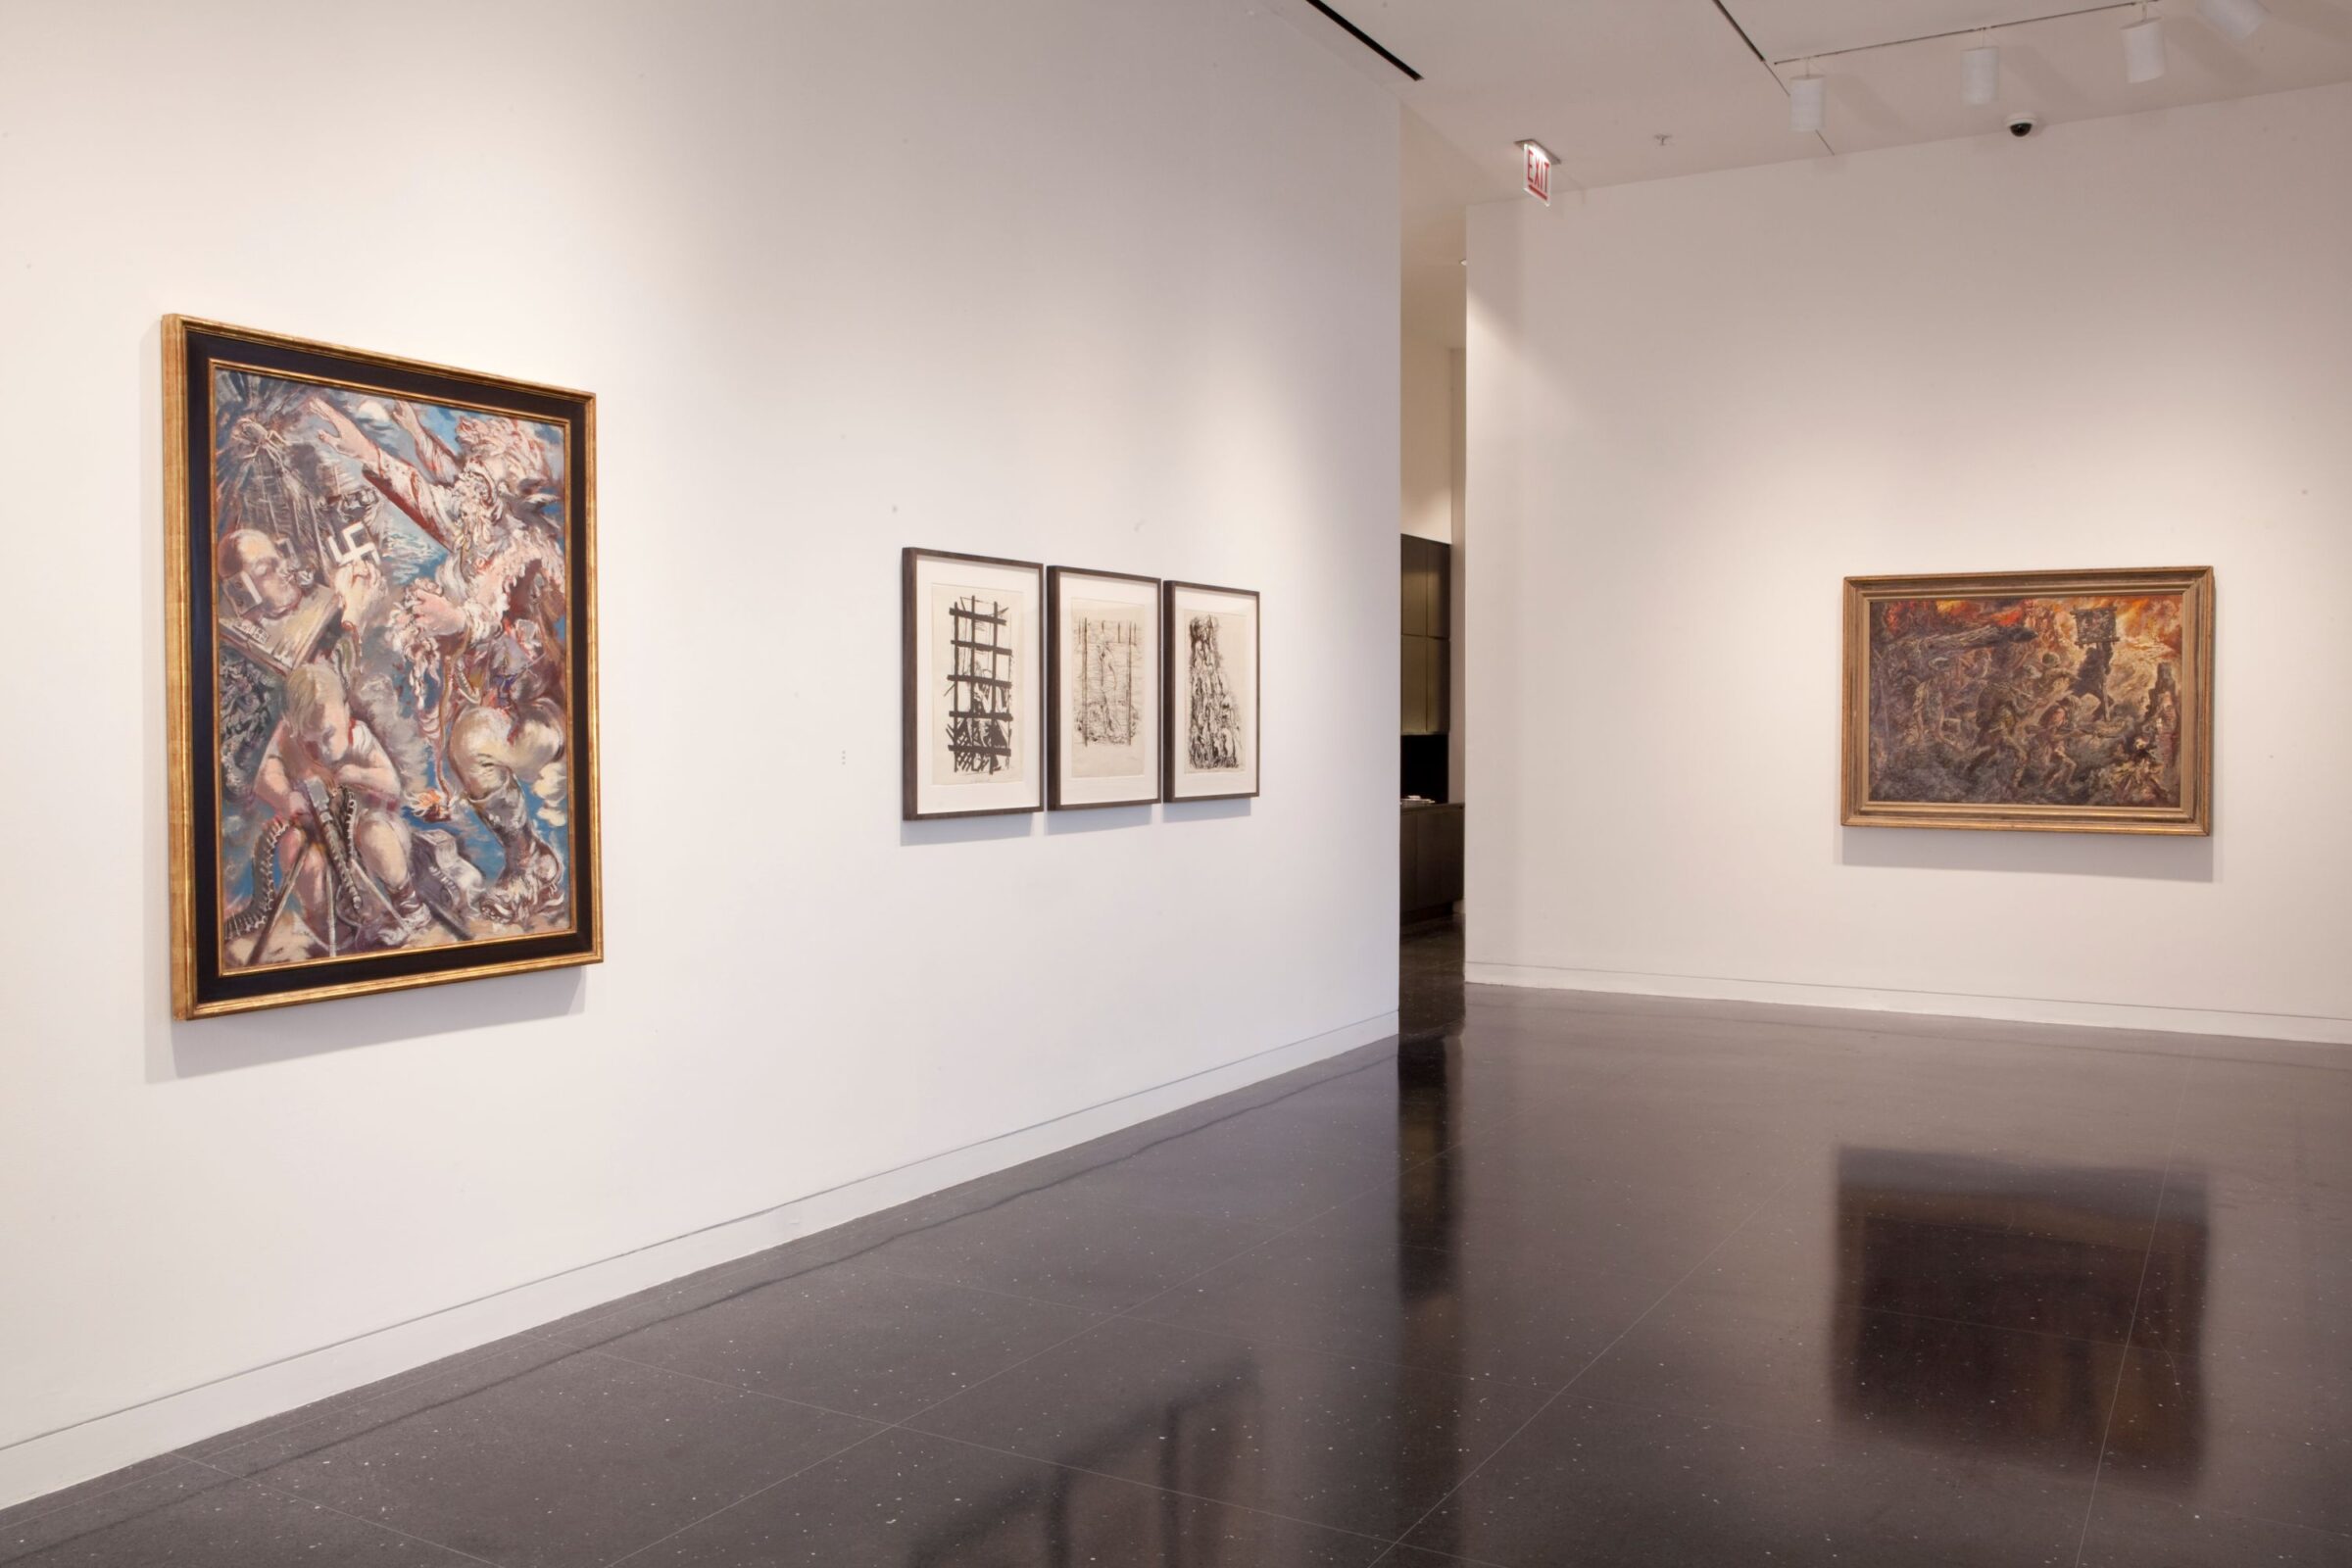 A large painting featuring Nazi and fascist imagery hangs in a gold frame to the viewer's left on a white gallery wall. To the right of this painting are three prints in black frames. On a far wall, a painting depicting a battle scene hangs in a gold frame.